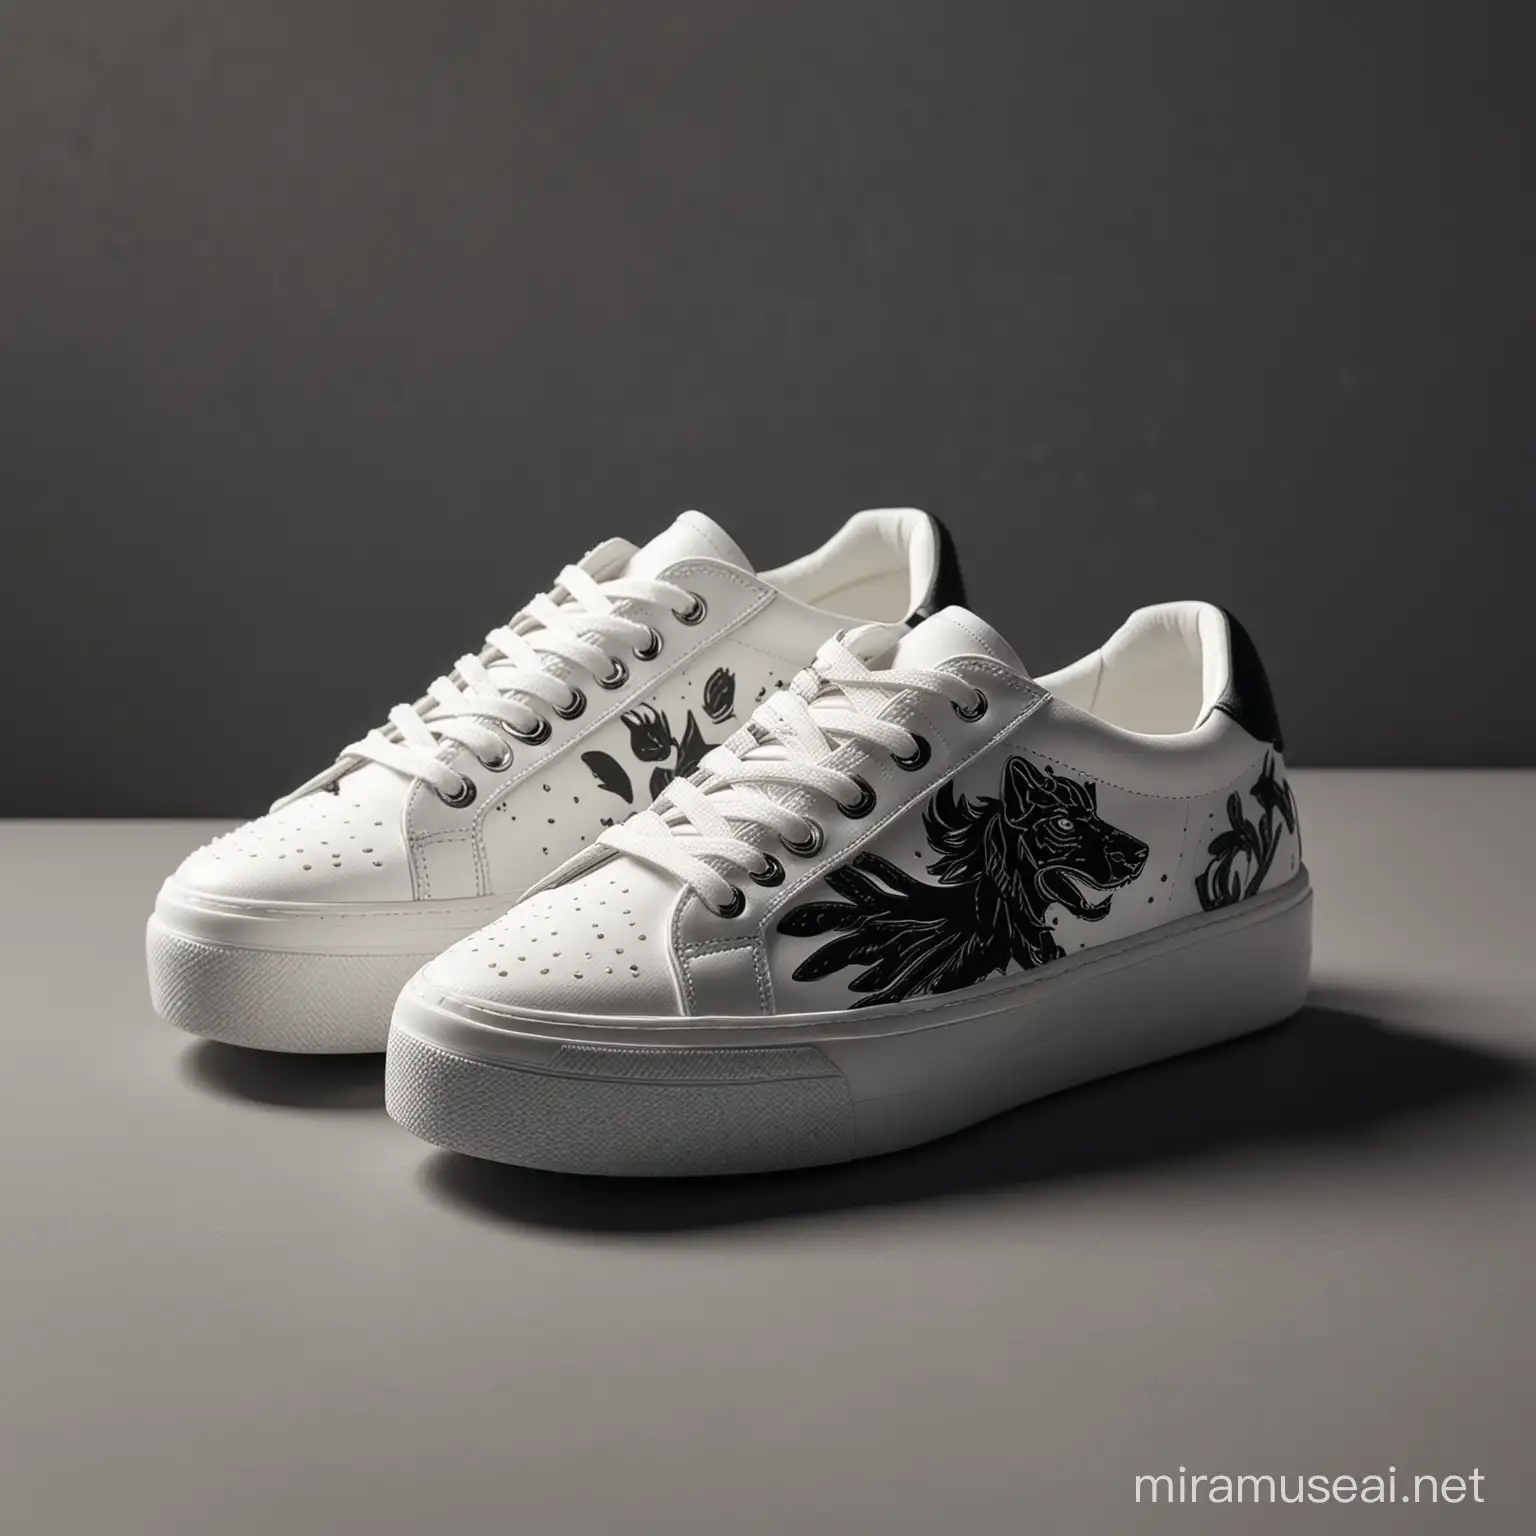 White Sneakers with Black Animal Designs on Table Cinematic Hyperealistic Product Photography